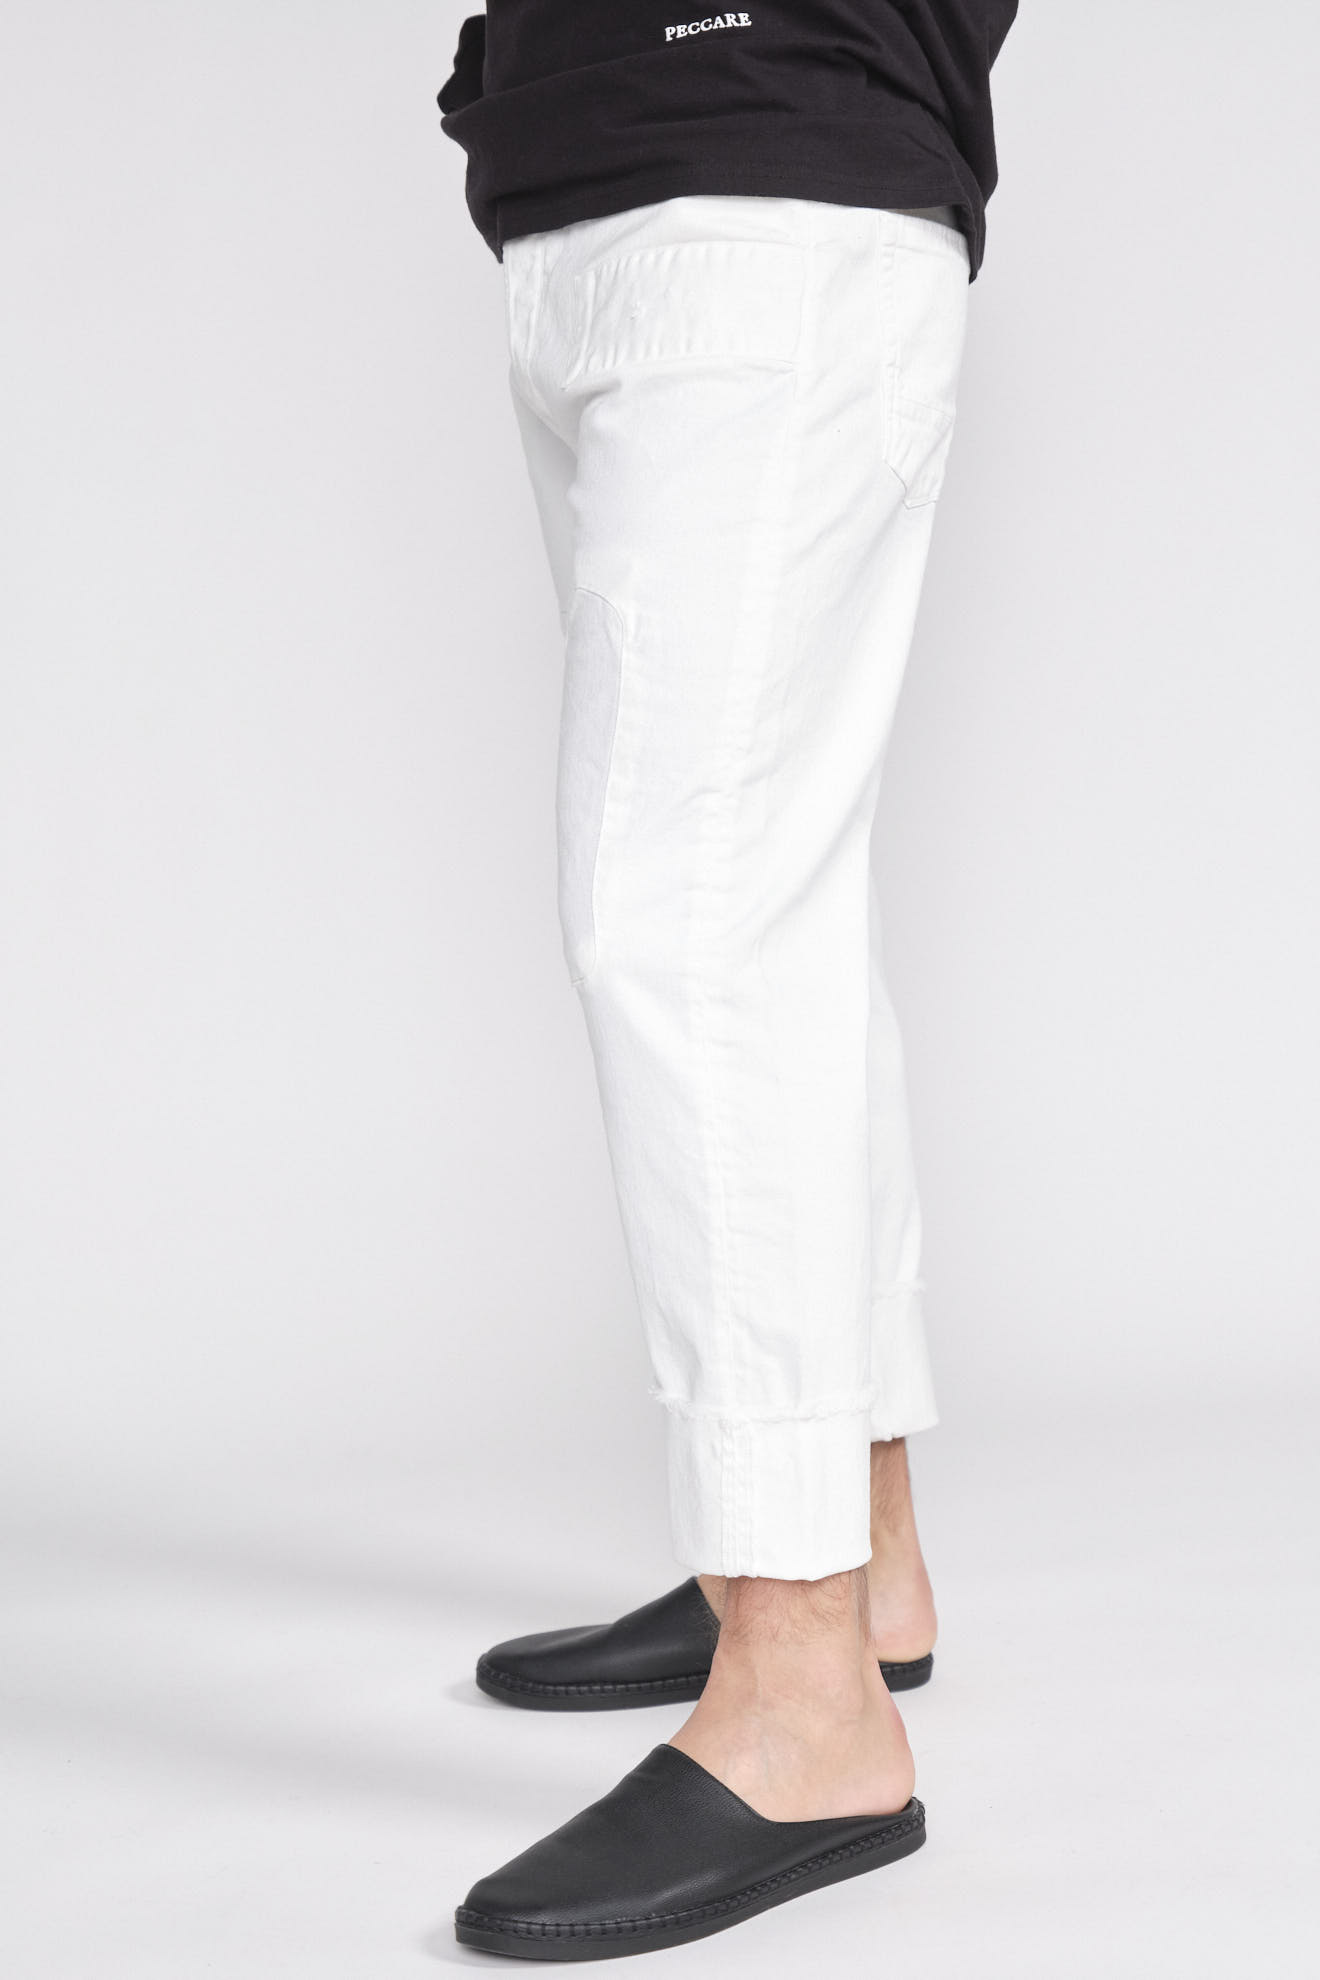 maurizio massimino Jose - denim jeans with patch patches white 50